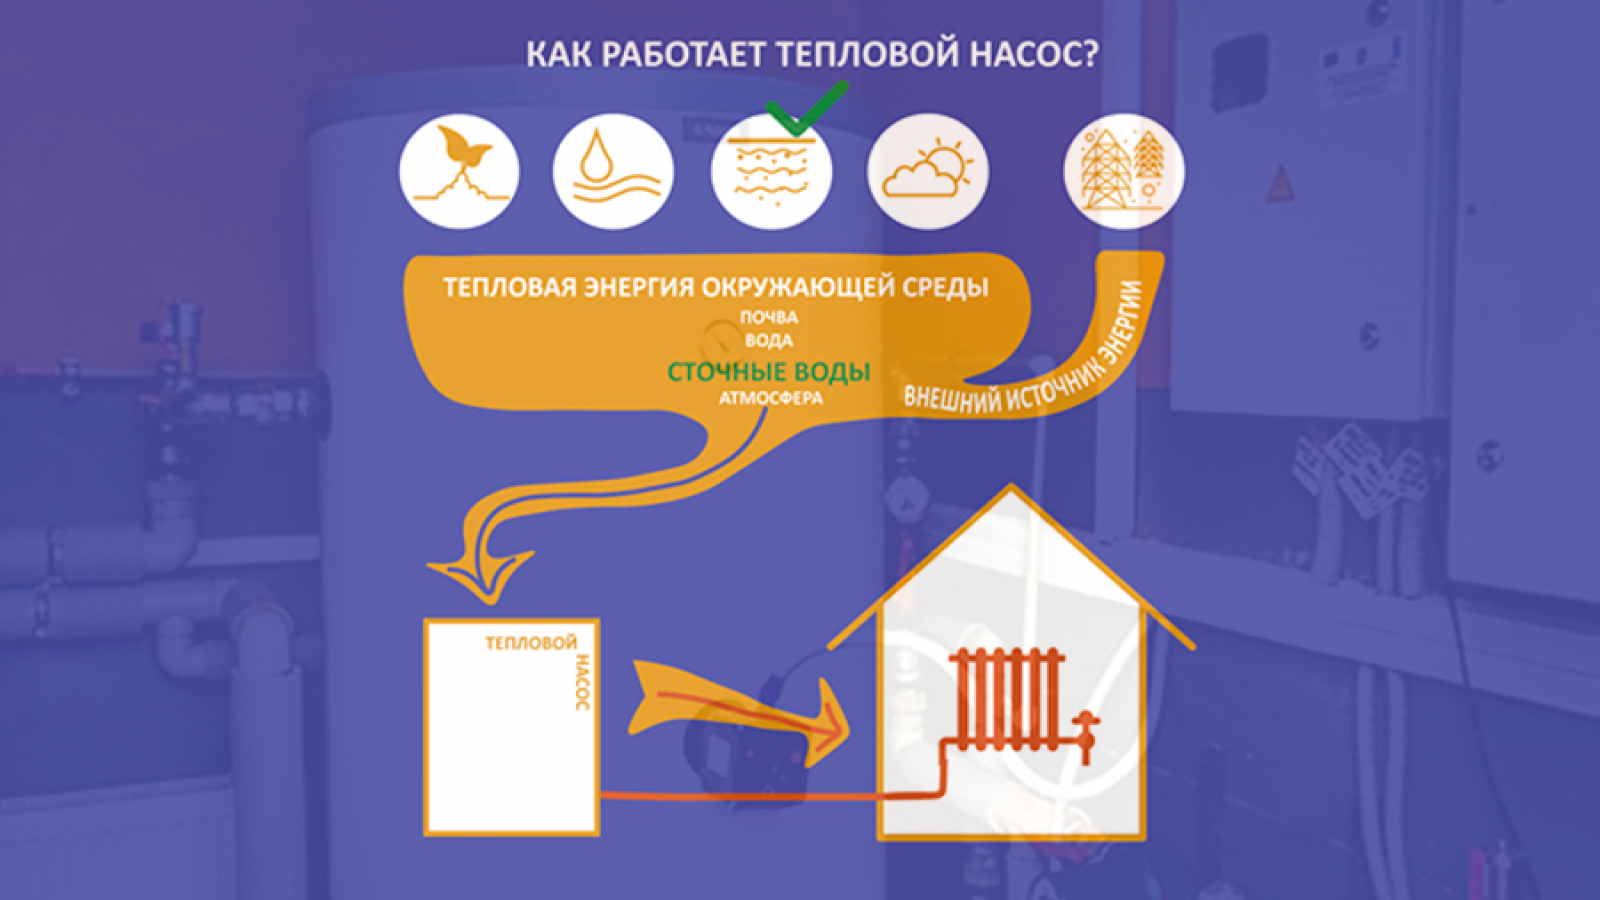 EU green initiative for Belarus: heat pump to save energy in Masty